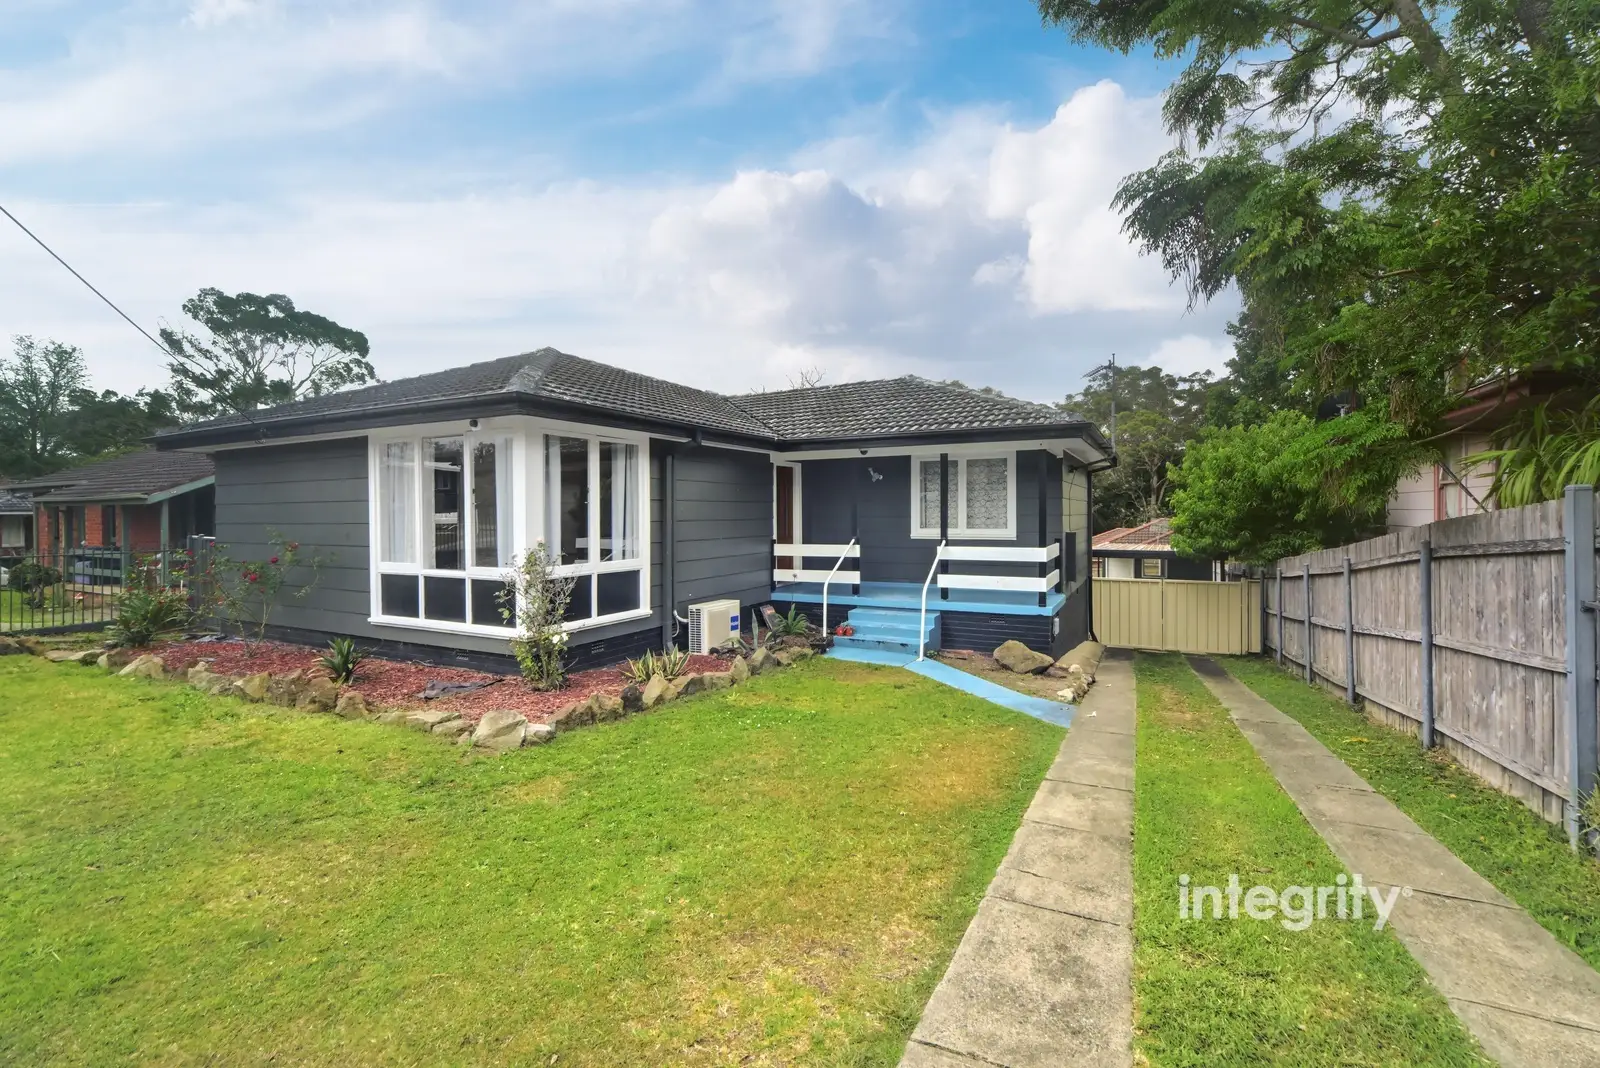 35 Leonard Street, Bomaderry Leased by Integrity Real Estate - image 1